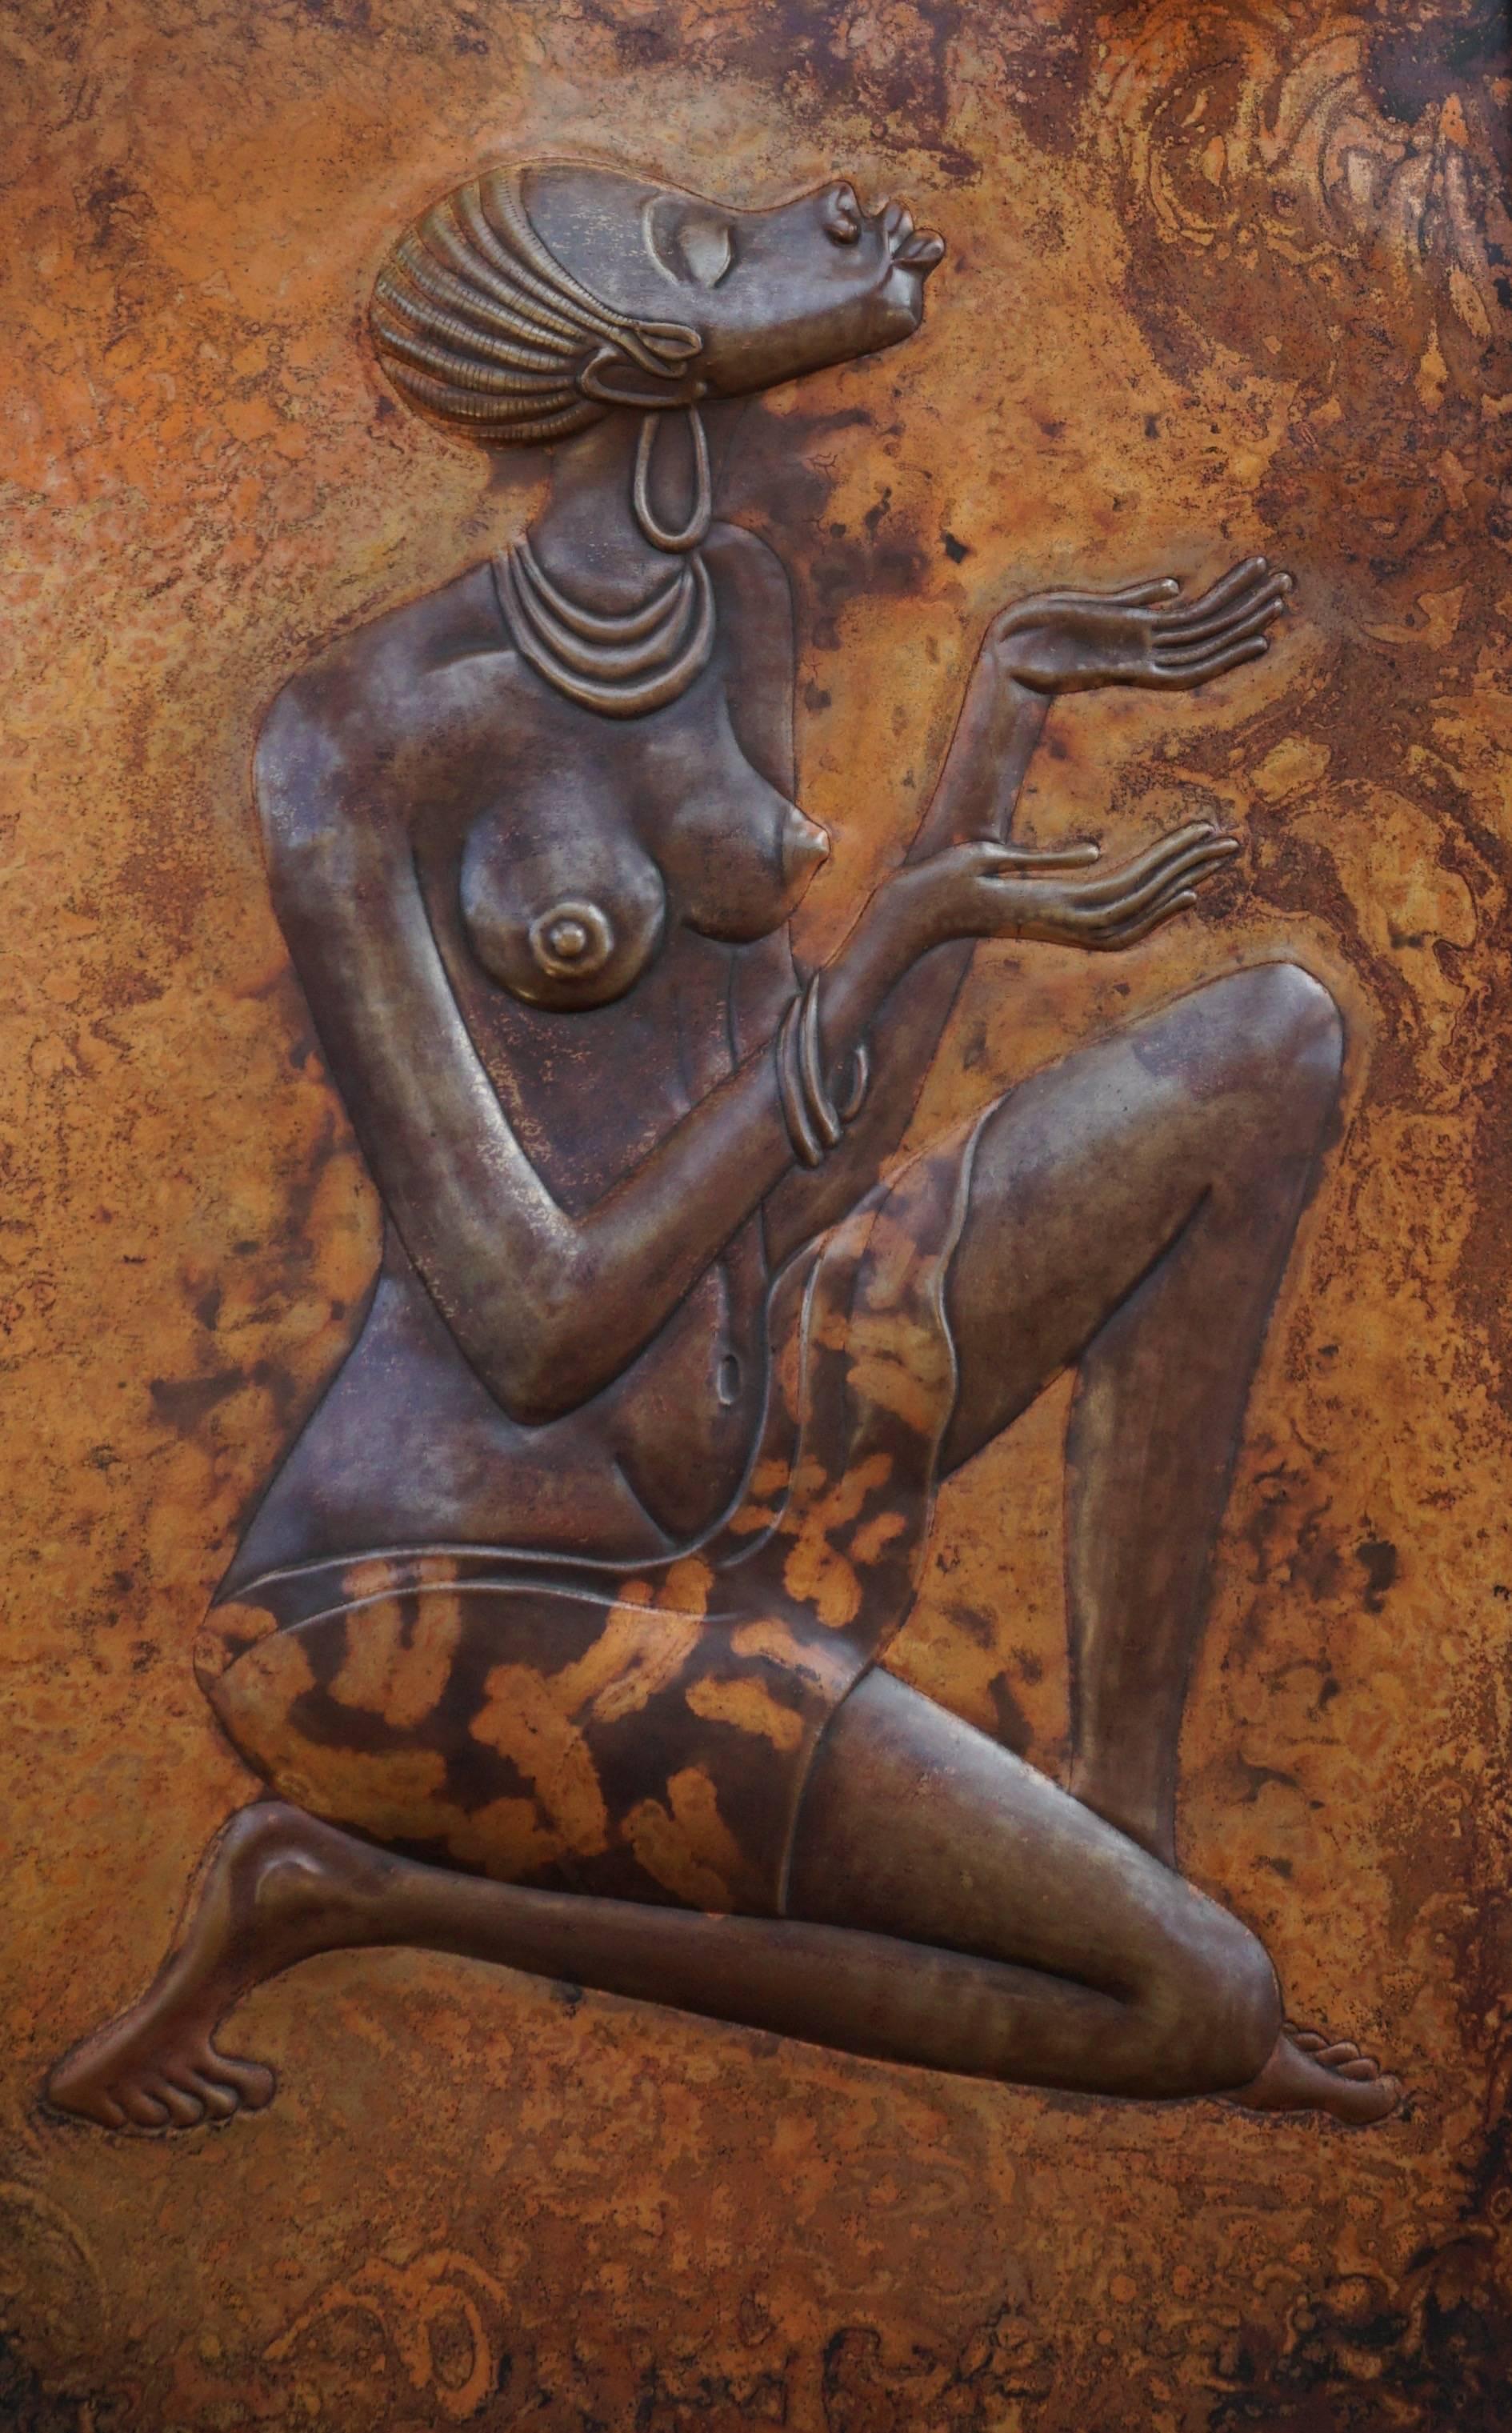 Hugh, lighted wall picture or object with Africa woman. This unique object is made by the Congolese artist Mutepa in 1981 and is in very good condition.